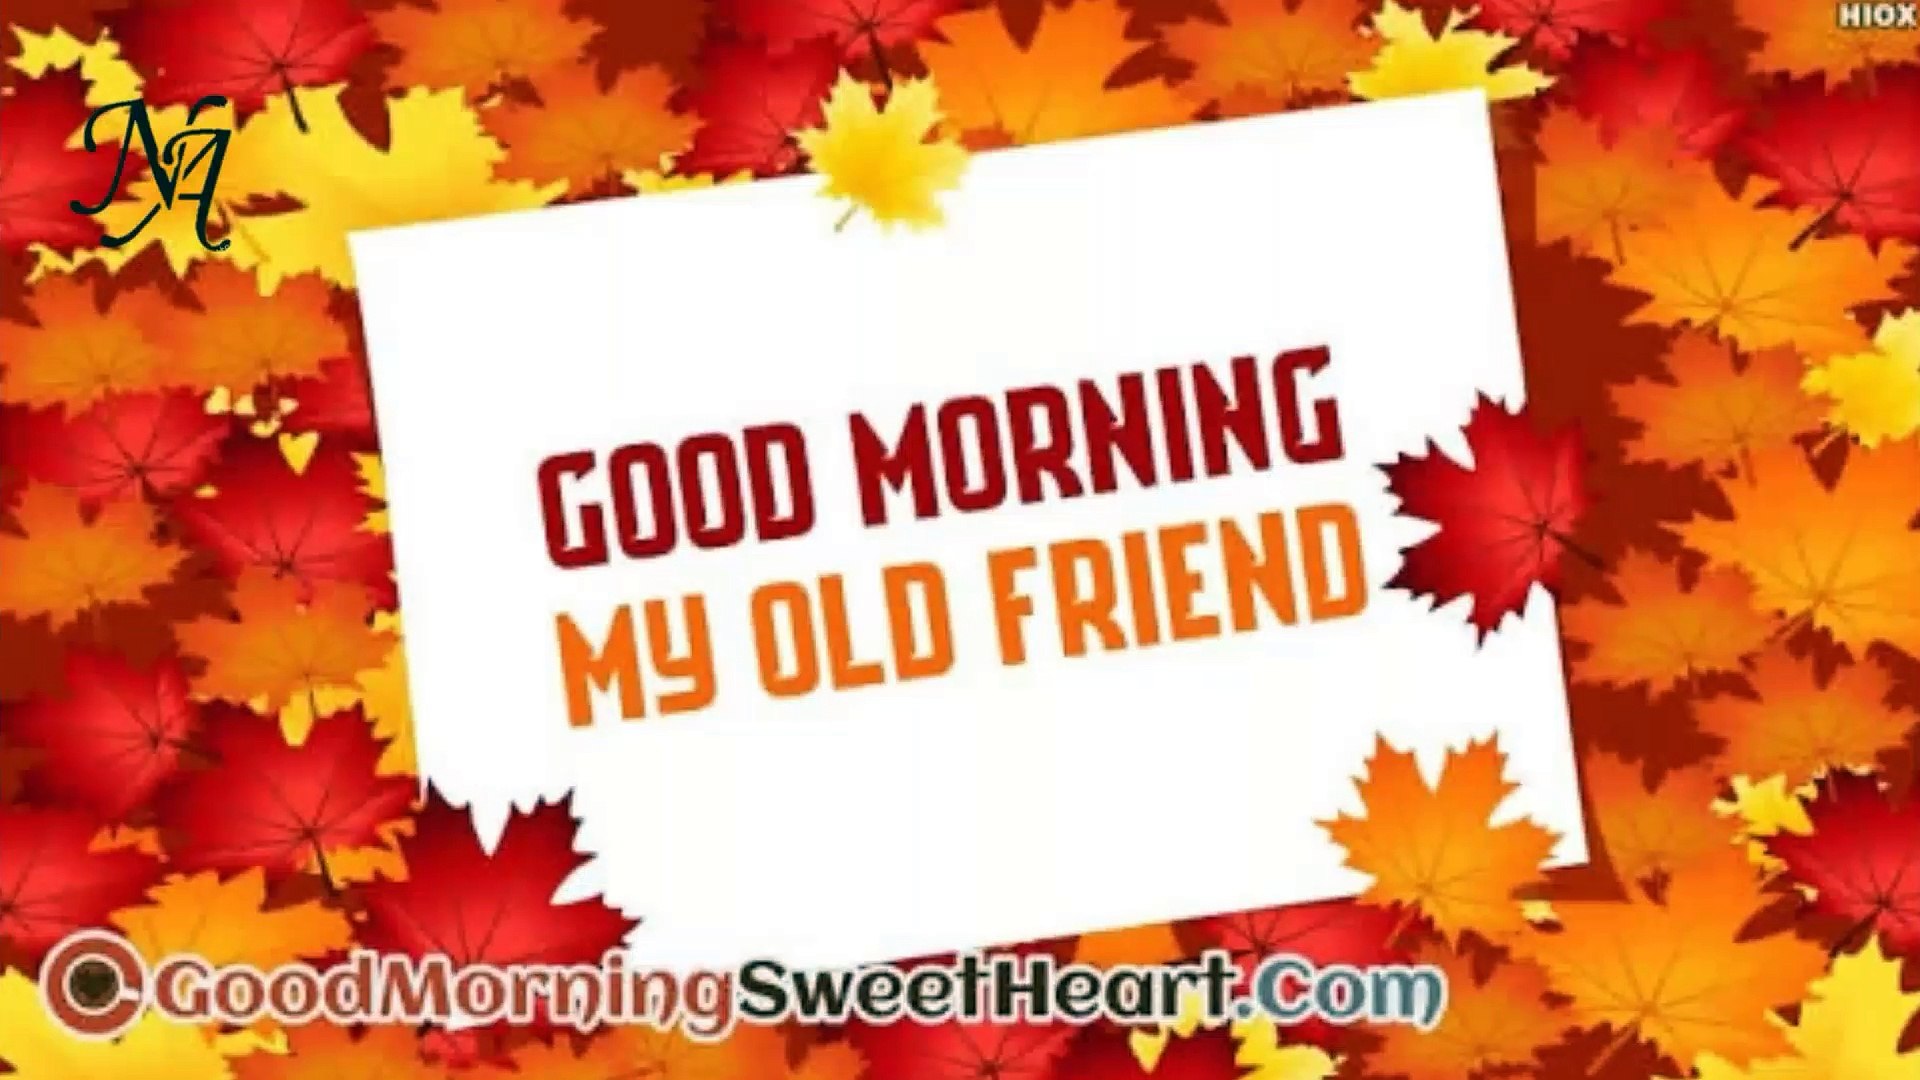 Good Morning Whatsapp Status 2018 - Good Morning Message To Old Friend , HD Wallpaper & Backgrounds